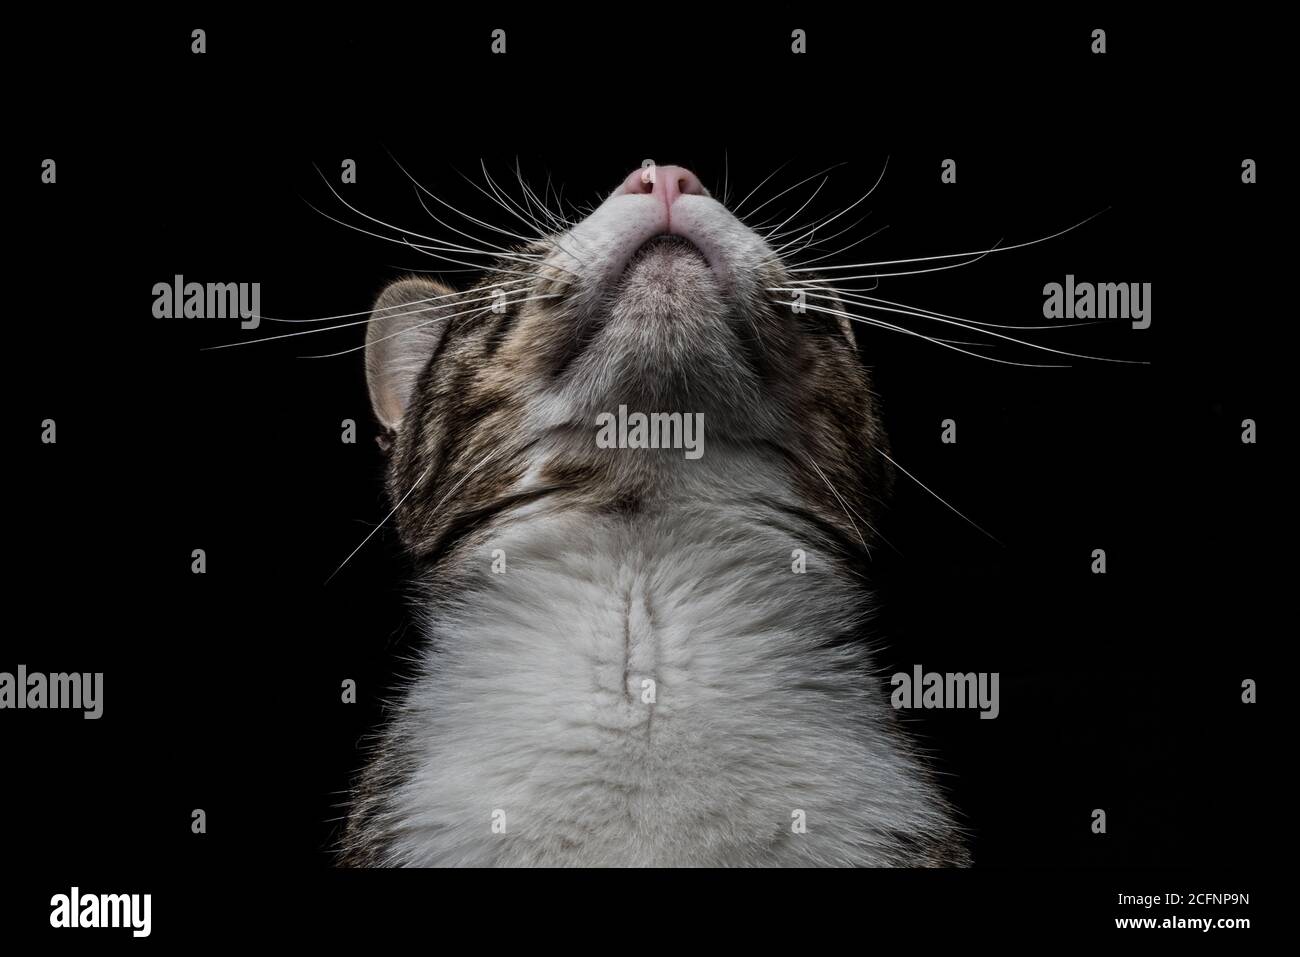 A tabby cat looks straight up showing off his chin and whiskers. Stock Photo